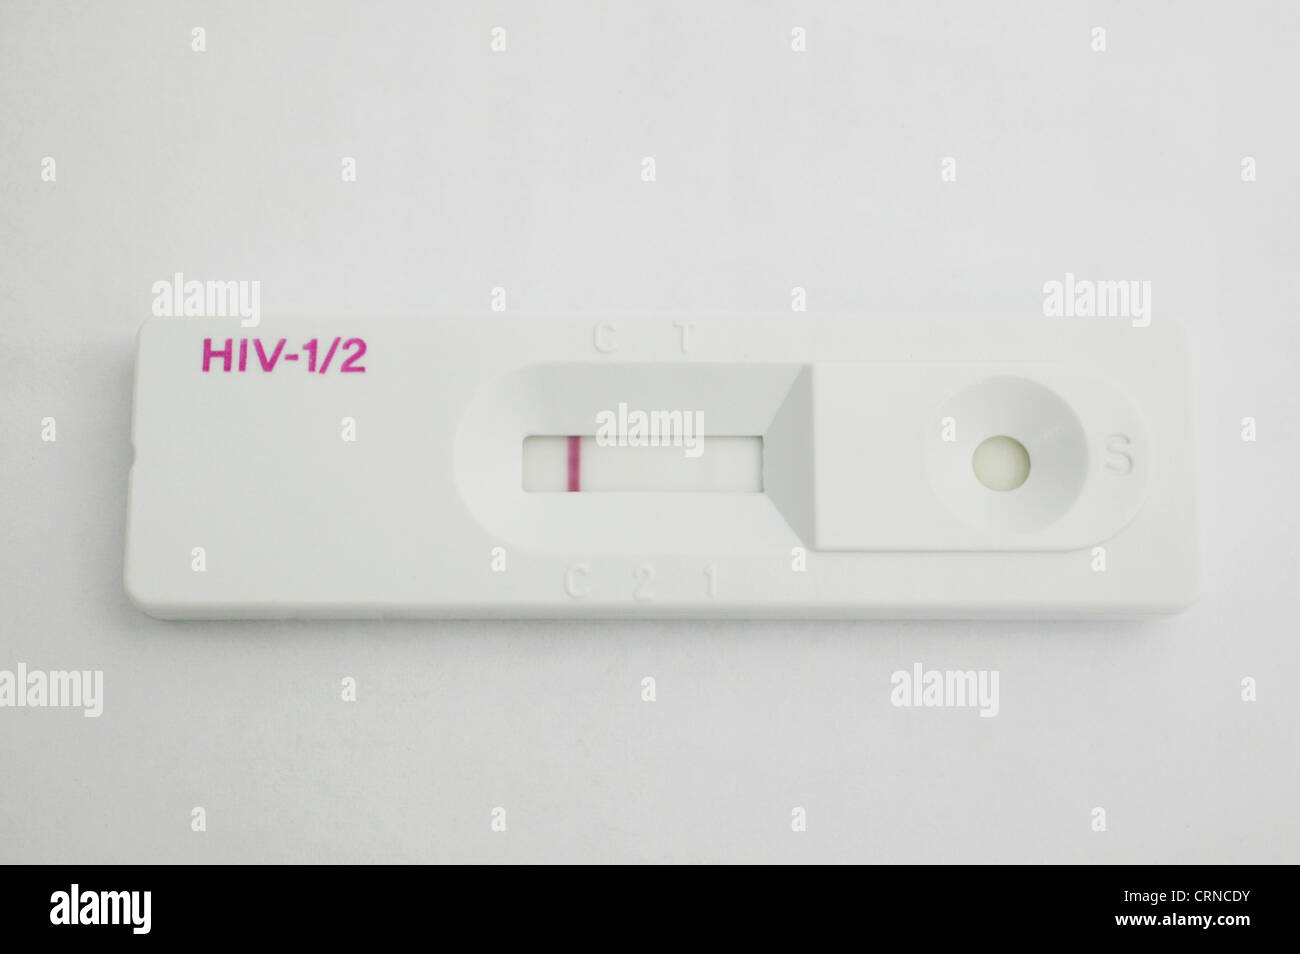 HIV rapid test The Rapid Antibody Test are intended to aid in the diagnosis of HIV infection. Stock Photo